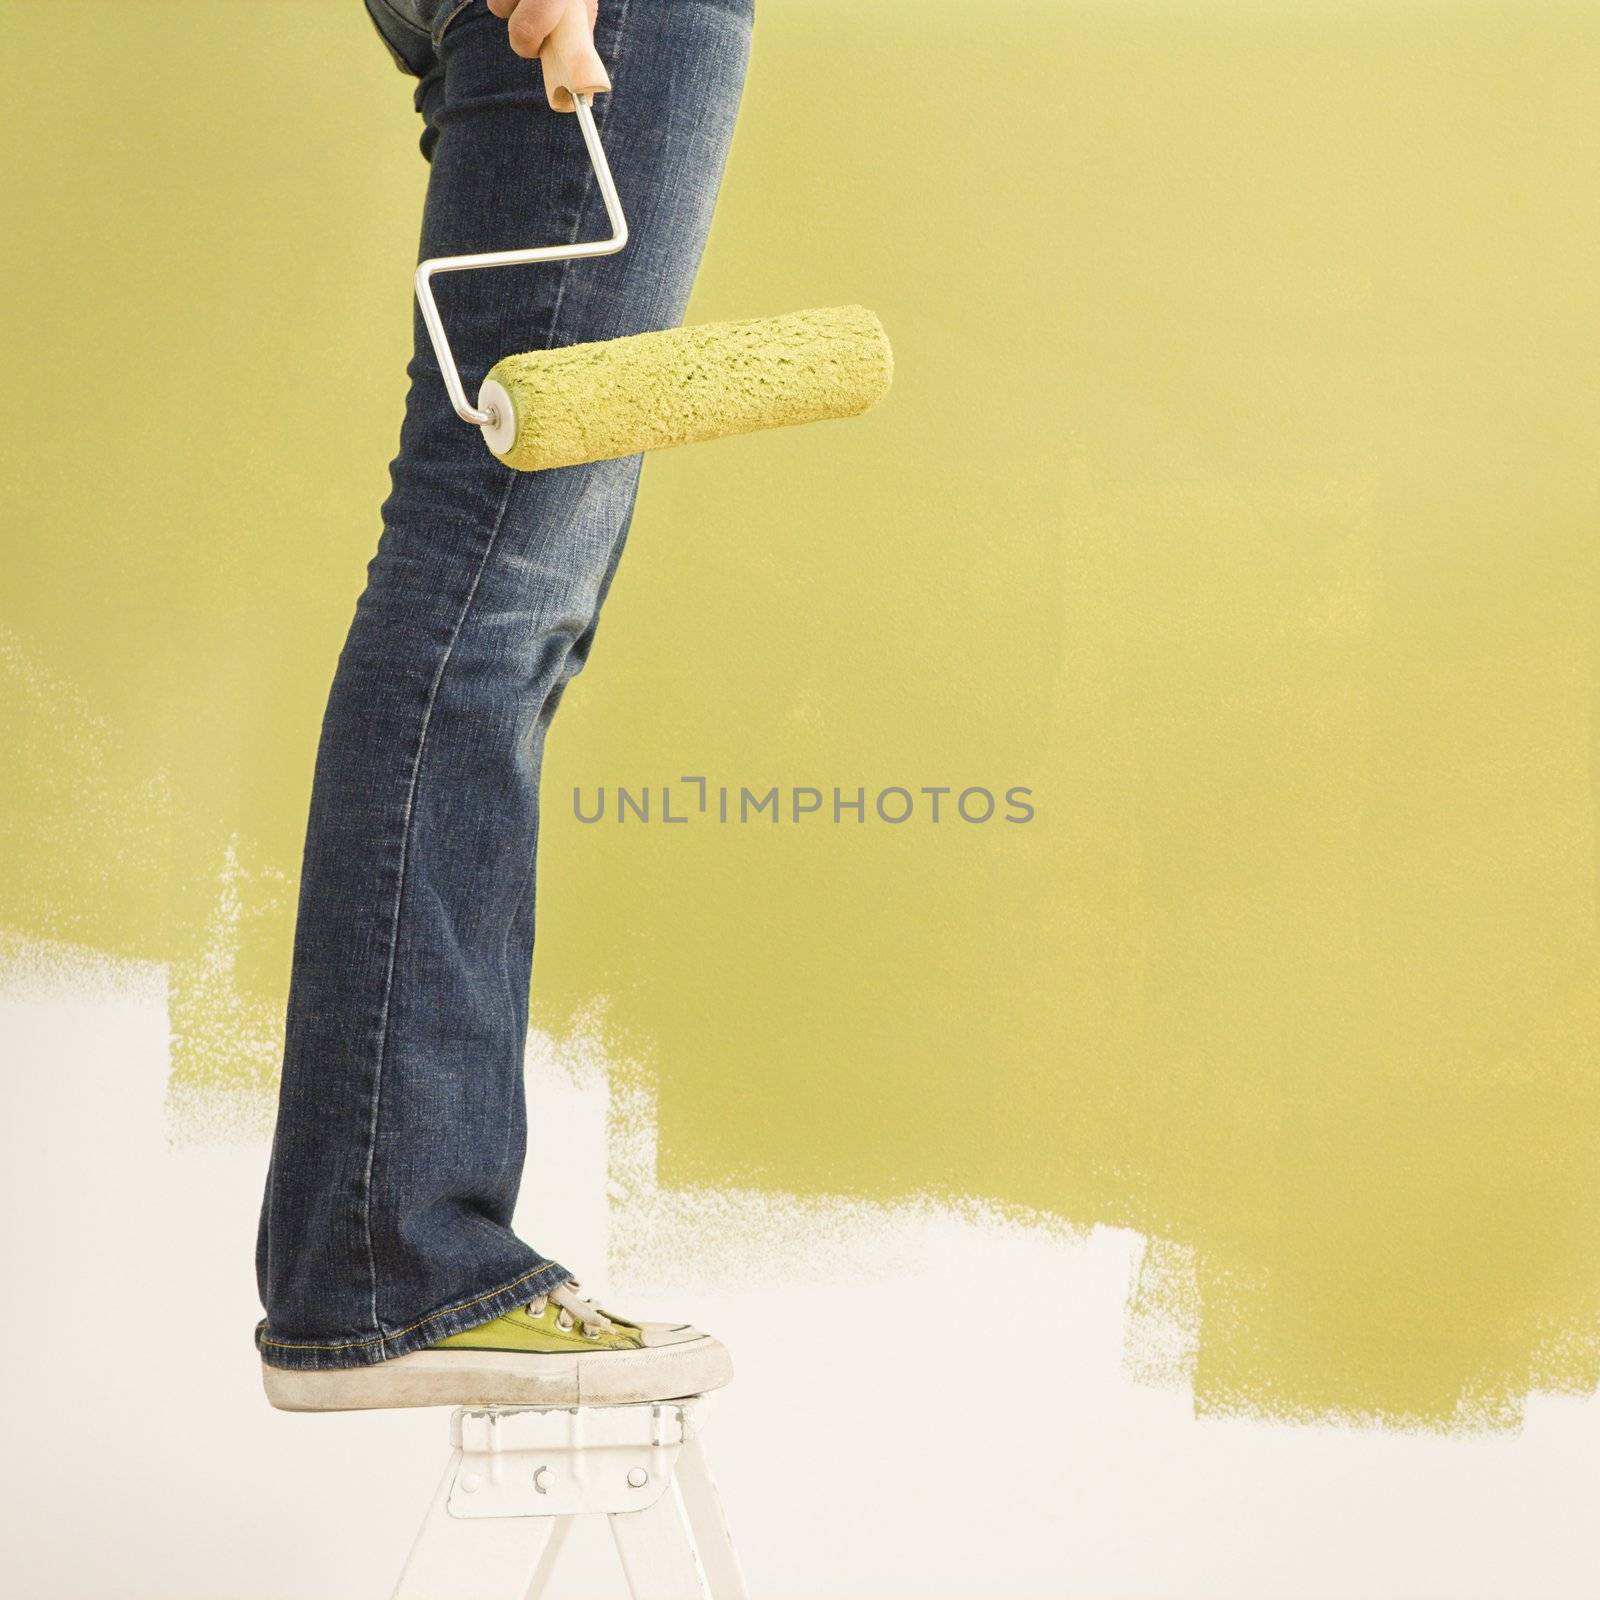 Legs of woman standing on stepladder holding paint roller with painted wall.